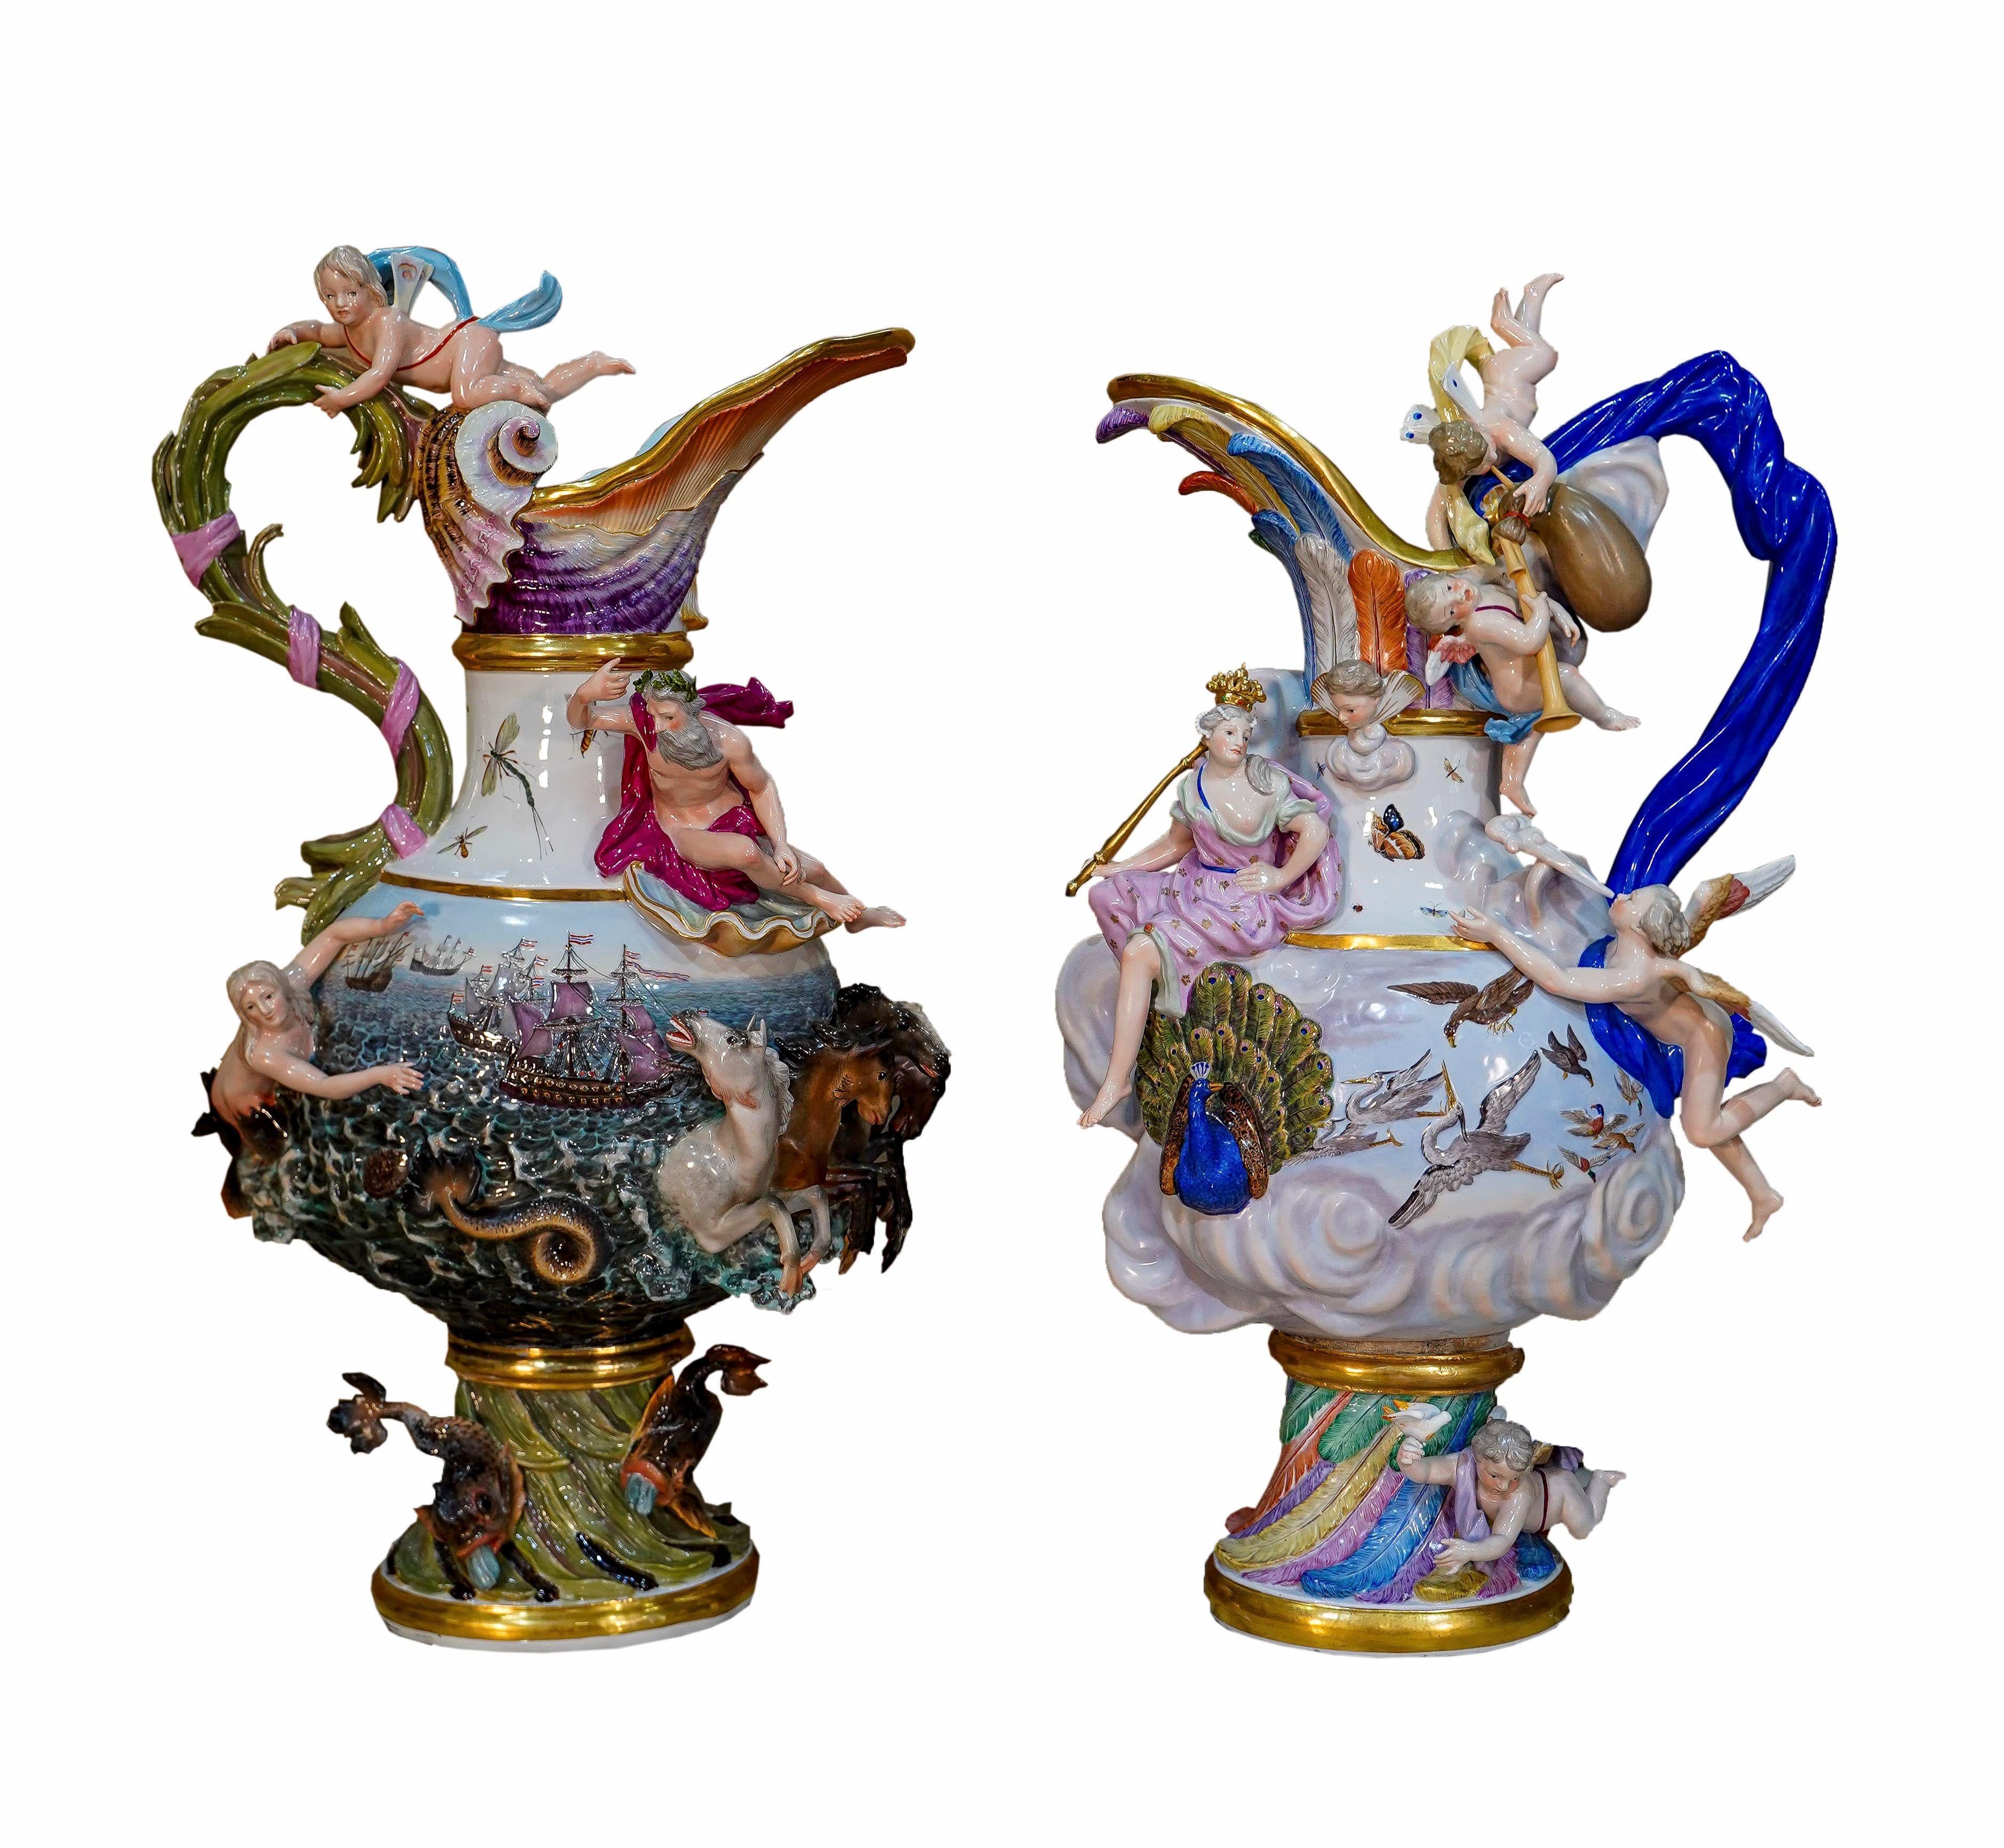 A rare 19th century complete set of four Meissen porcelain ewers represents the Elements: Water. Air, Earth and Fire (4). Each vase is an incredible piece of artwork, interpreting one of the four elements into a stunning vase form of unsurpassed